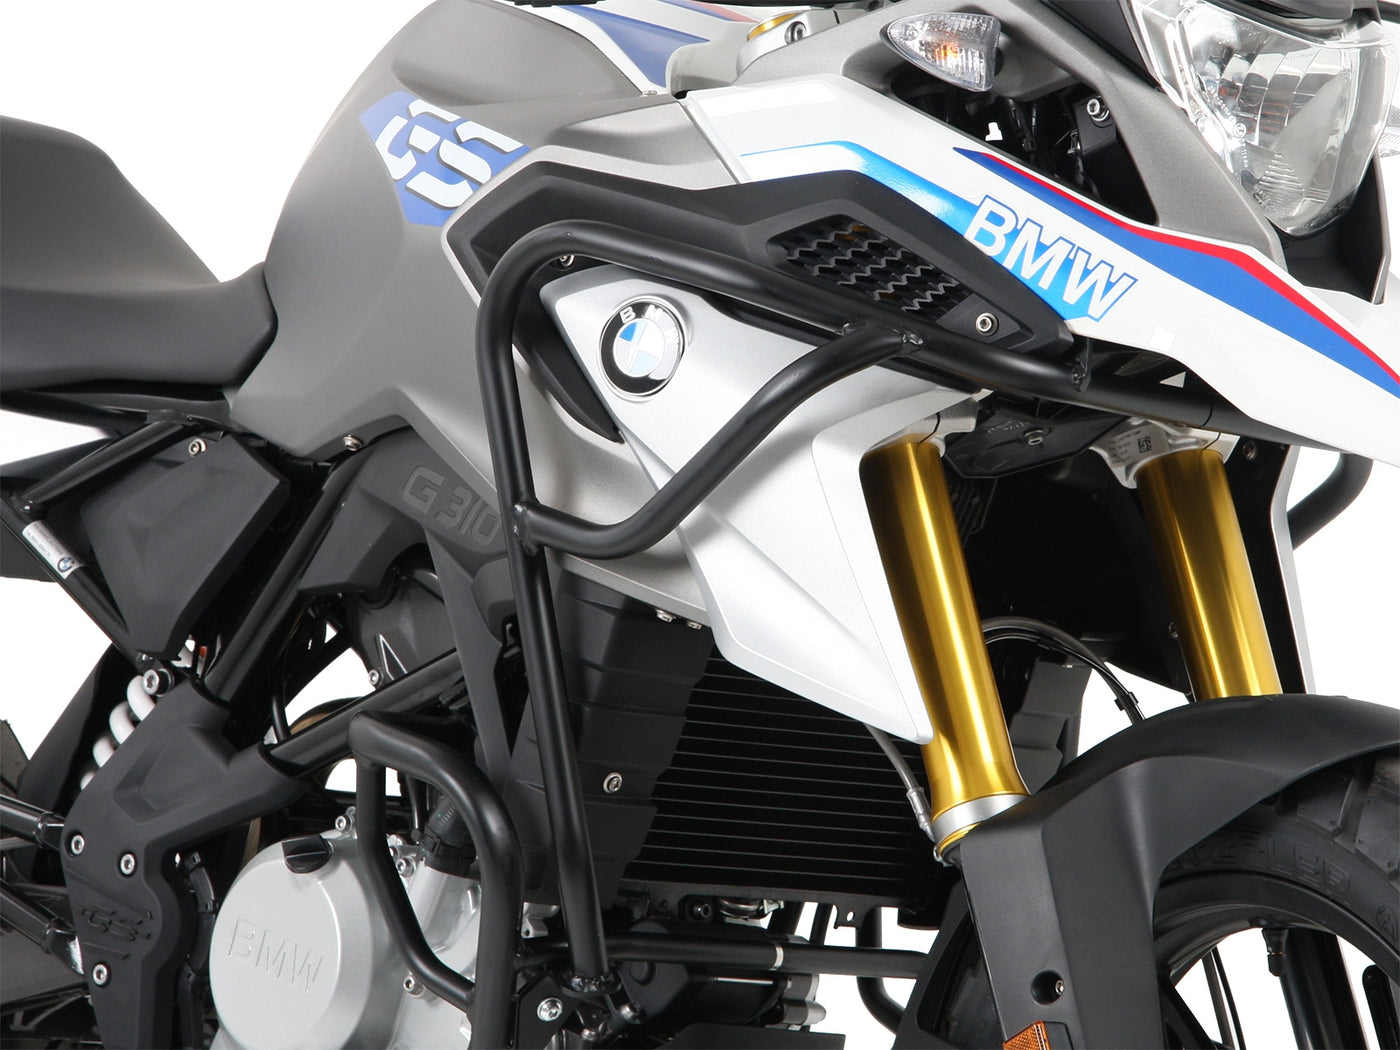 Engine Protection Bar & Tank Guard for BMW G 310 GS (2017-)